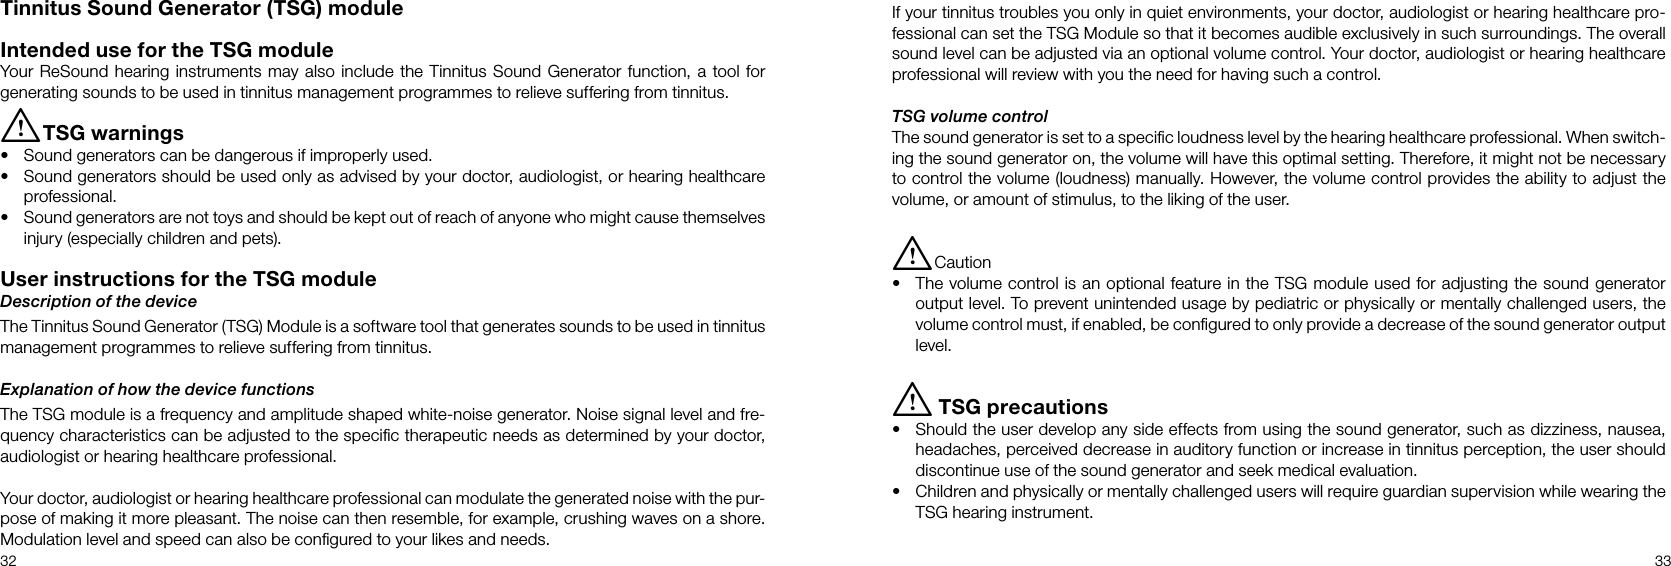 32 33Tinnitus Sound Generator (TSG) moduleIntended use for the TSG moduleYour ReSound hearing instruments may also include the Tinnitus Sound Generator function, a tool for generating sounds to be used in tinnitus management programmes to relieve suffering from tinnitus.i TSG warnings•  Sound generators can be dangerous if improperly used.•  Sound generators should be used only as advised by your doctor, audiologist, or hearing healthcare professional.•  Sound generators are not toys and should be kept out of reach of anyone who might cause themselves injury (especially children and pets).User instructions for the TSG moduleDescription of the deviceThe Tinnitus Sound Generator (TSG) Module is a software tool that generates sounds to be used in tinnitus management programmes to relieve suffering from tinnitus.Explanation of how the device functionsThe TSG module is a frequency and amplitude shaped white-noise generator. Noise signal level and fre-quency characteristics can be adjusted to the speciﬁc therapeutic needs as determined by your doctor, audiologist or hearing healthcare professional.Your doctor, audiologist or hearing healthcare professional can modulate the generated noise with the pur-pose of making it more pleasant. The noise can then resemble, for example, crushing waves on a shore. Modulation level and speed can also be conﬁgured to your likes and needs.If your tinnitus troubles you only in quiet environments, your doctor, audiologist or hearing healthcare pro-fessional can set the TSG Module so that it becomes audible exclusively in such surroundings. The overall sound level can be adjusted via an optional volume control. Your doctor, audiologist or hearing healthcare professional will review with you the need for having such a control.TSG volume controlThe sound generator is set to a speciﬁc loudness level by the hearing healthcare professional. When switch-ing the sound generator on, the volume will have this optimal setting. Therefore, it might not be necessary to control the volume (loudness) manually. However, the volume control provides the ability to adjust the volume, or amount of stimulus, to the liking of the user.i Caution •  The volume control is an optional feature in the TSG module used for adjusting the sound generator output level. To prevent unintended usage by pediatric or physically or mentally challenged users, the volume control must, if enabled, be conﬁgured to only provide a decrease of the sound generator output level.i TSG precautions•  Should the user develop any side effects from using the sound generator, such as dizziness, nausea, headaches, perceived decrease in auditory function or increase in tinnitus perception, the user should discontinue use of the sound generator and seek medical evaluation.•  Children and physically or mentally challenged users will require guardian supervision while wearing the TSG hearing instrument.